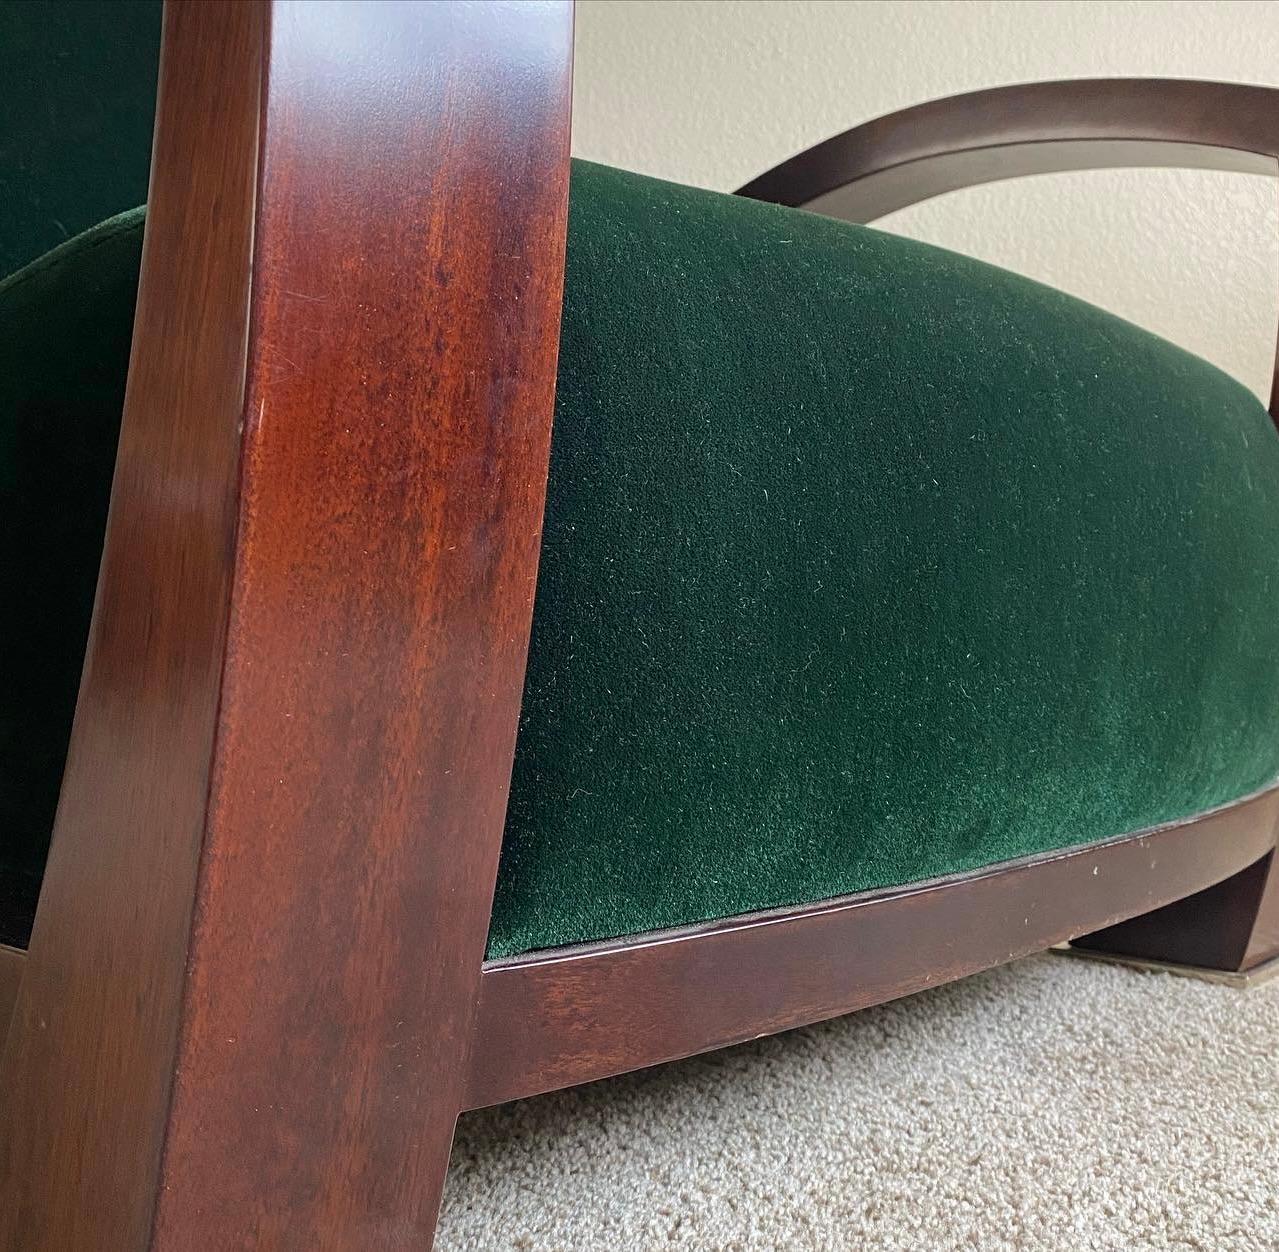 Art Deco “Antibes” Mahogany Lounge Chair (A. Soudavar for Mirak) in Forest Green Mohair For Sale